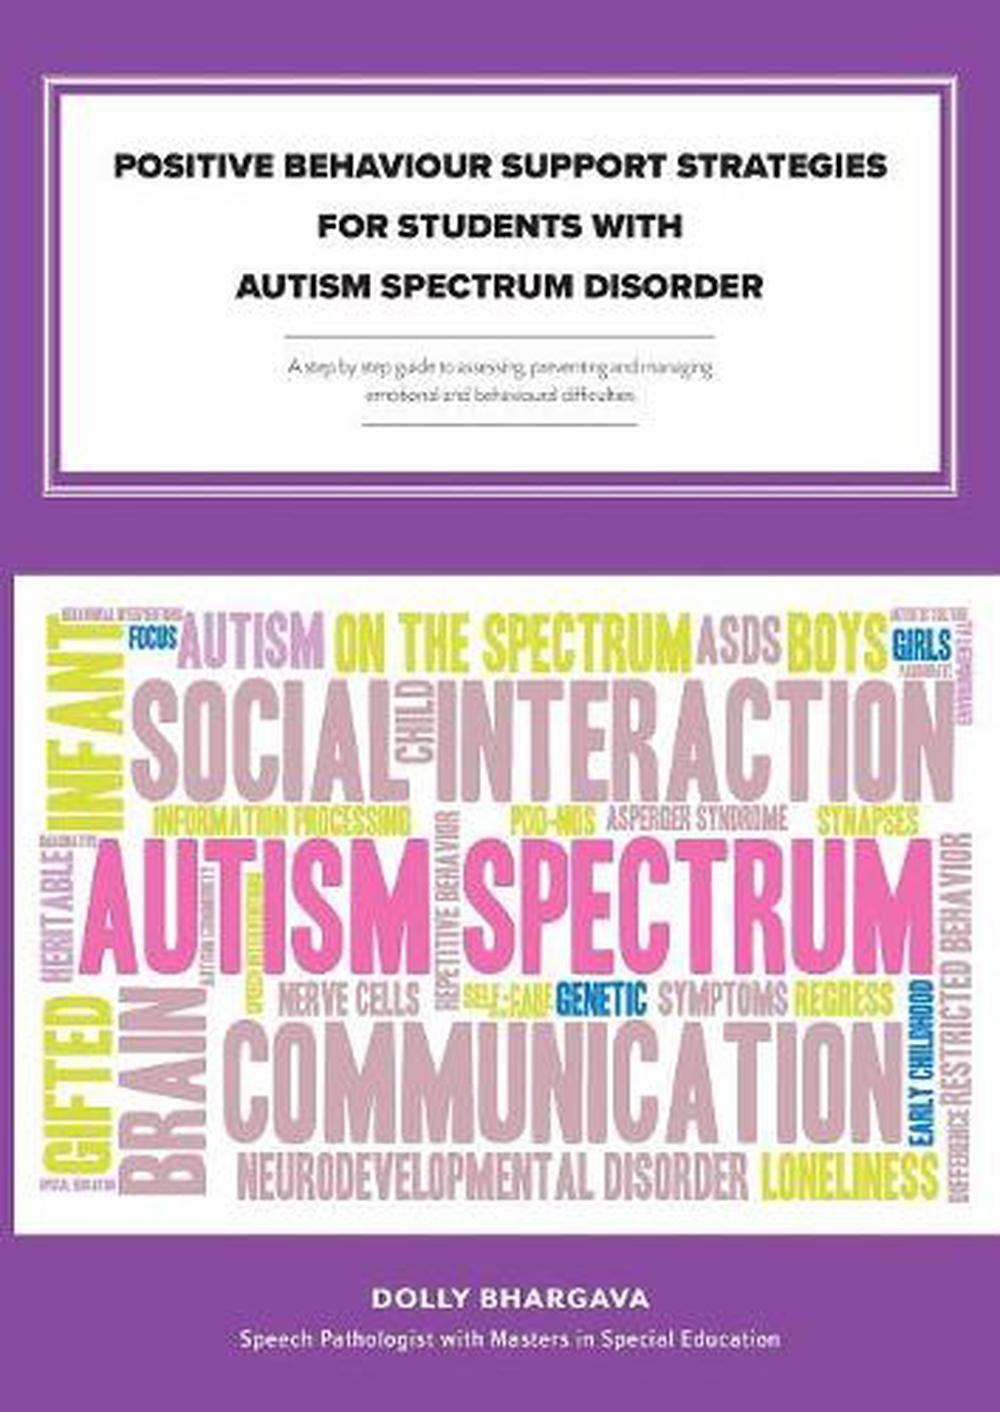 Students With Autism Spectrum Disorder The Diject